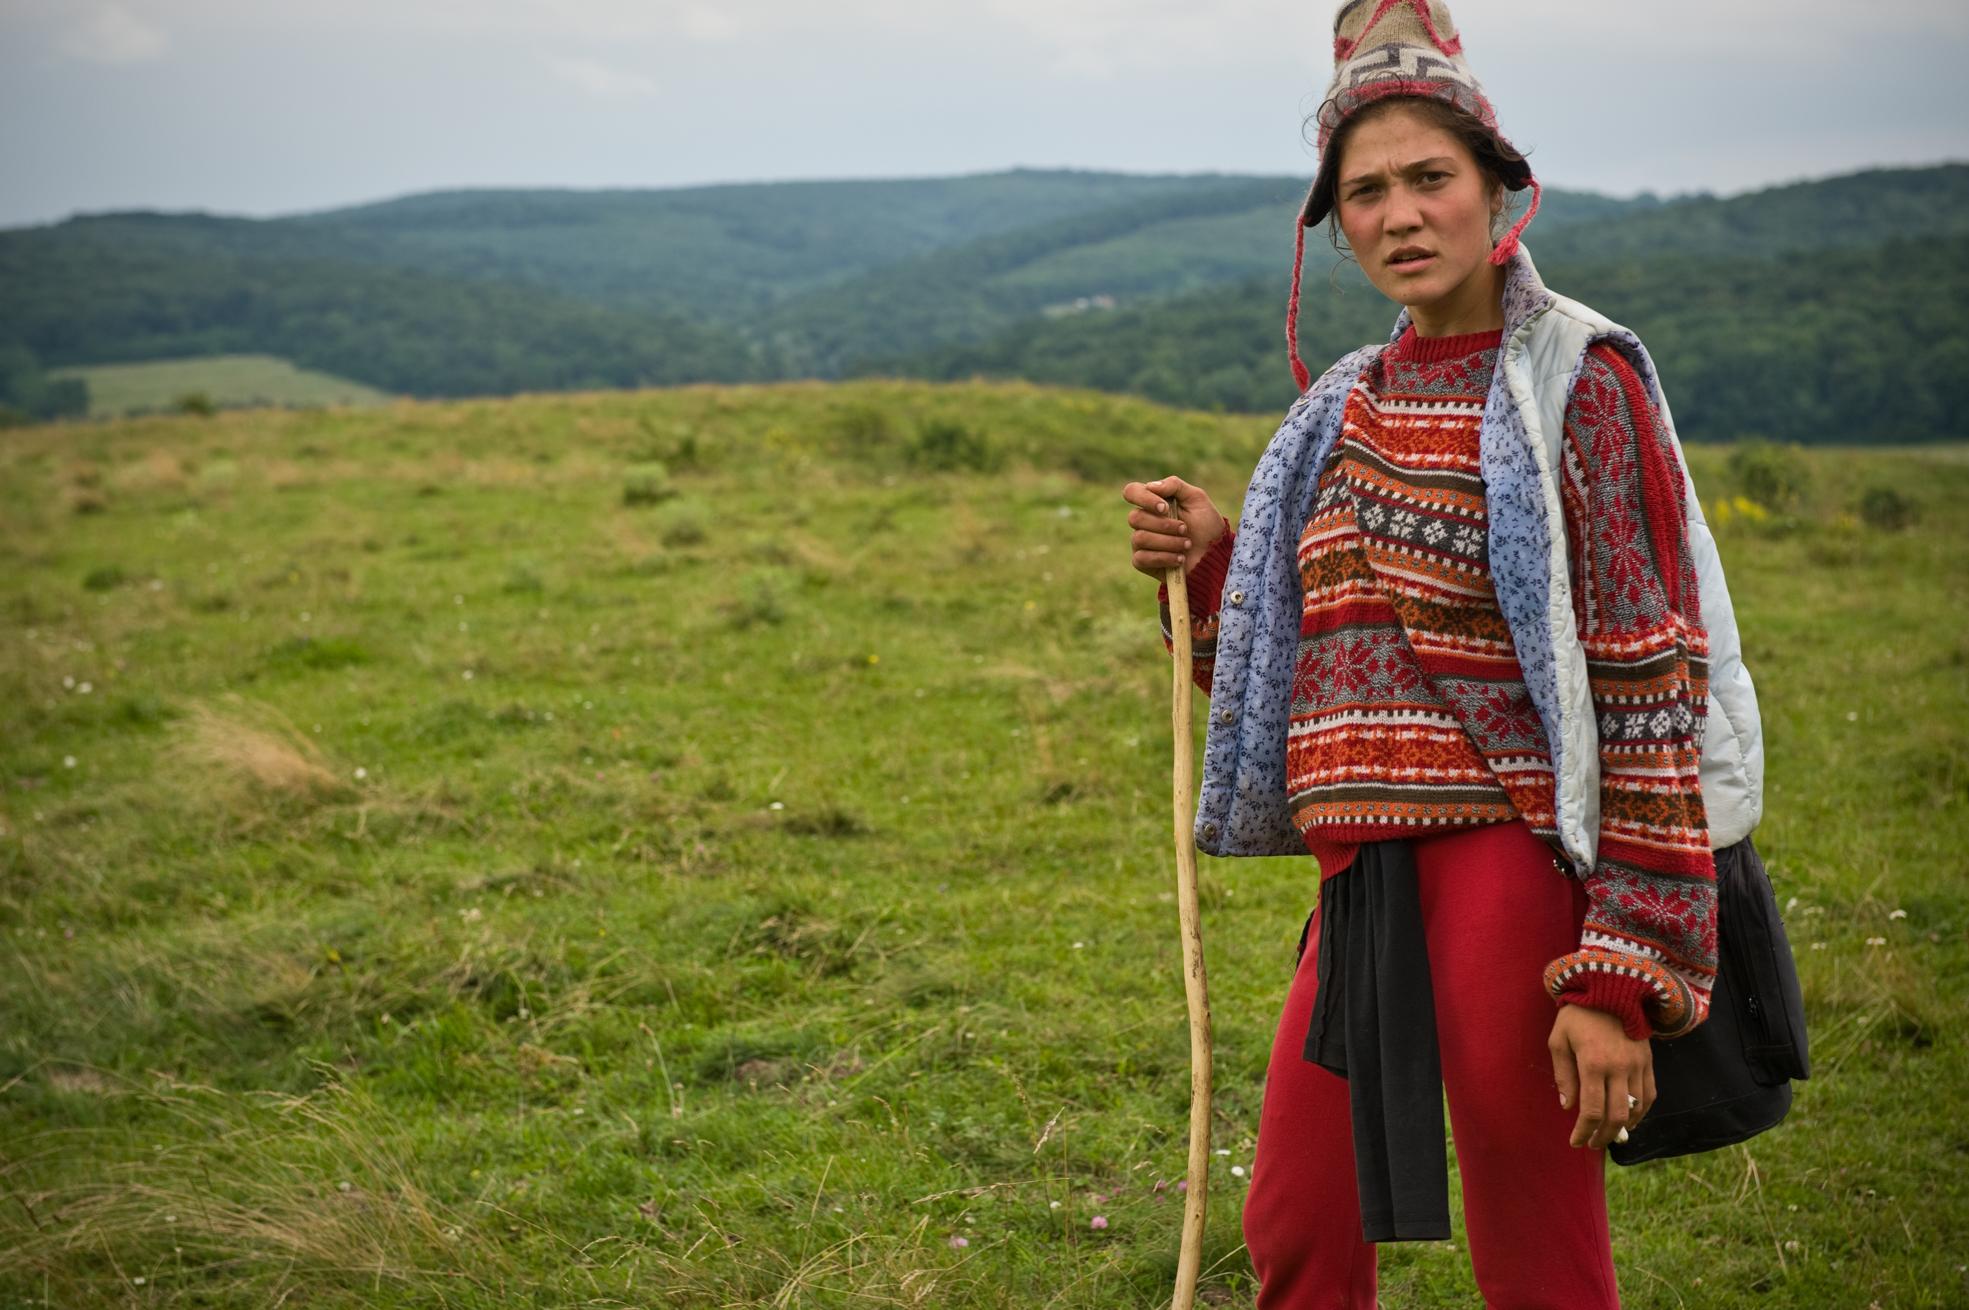 A day in the village of the missing generation - Romania